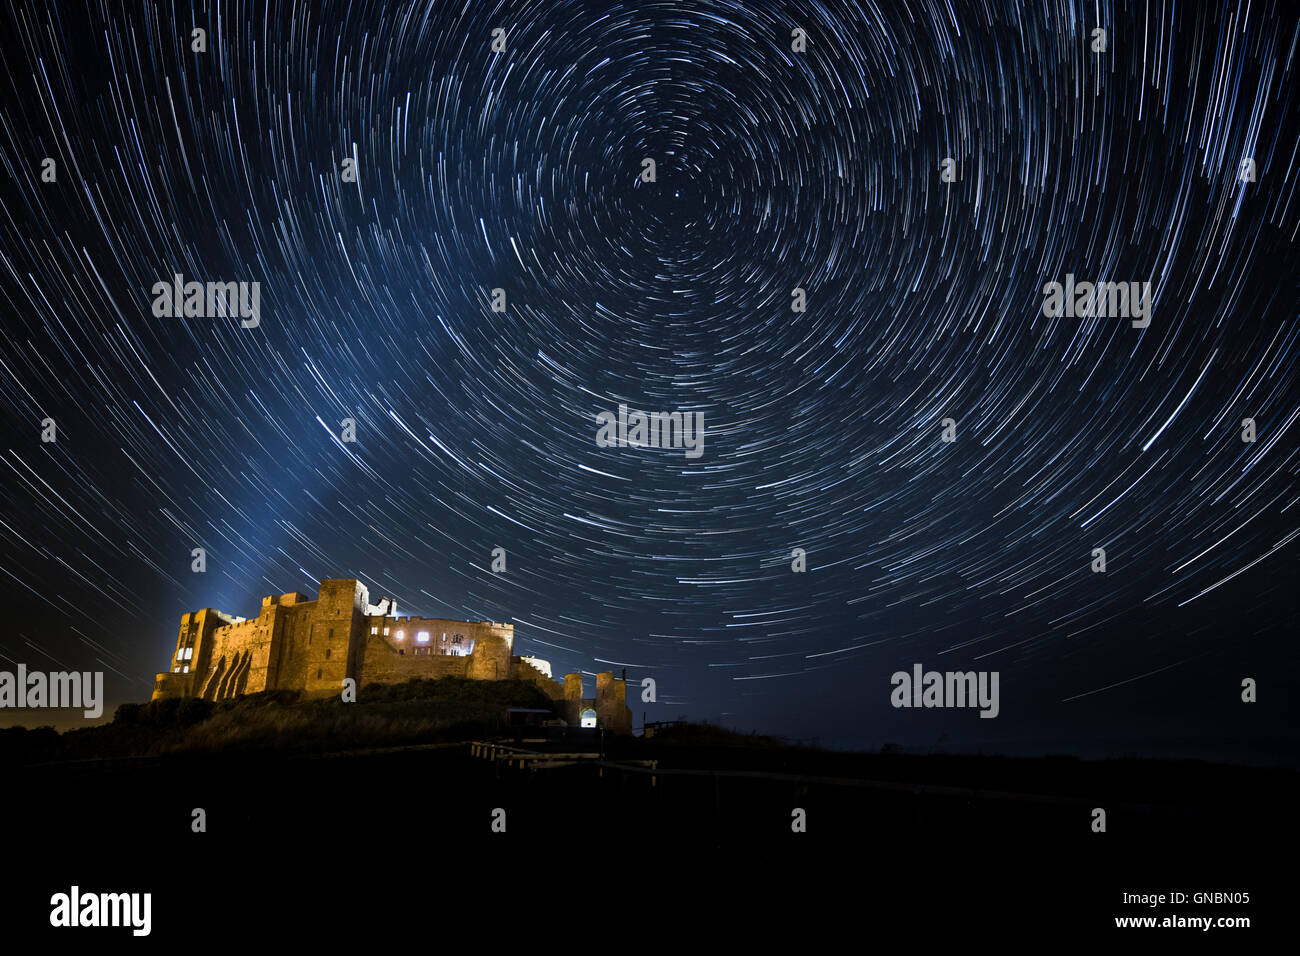 A Night Sky full of Stars at Bamburgh Castle in Northumberland, UK Stock Photo